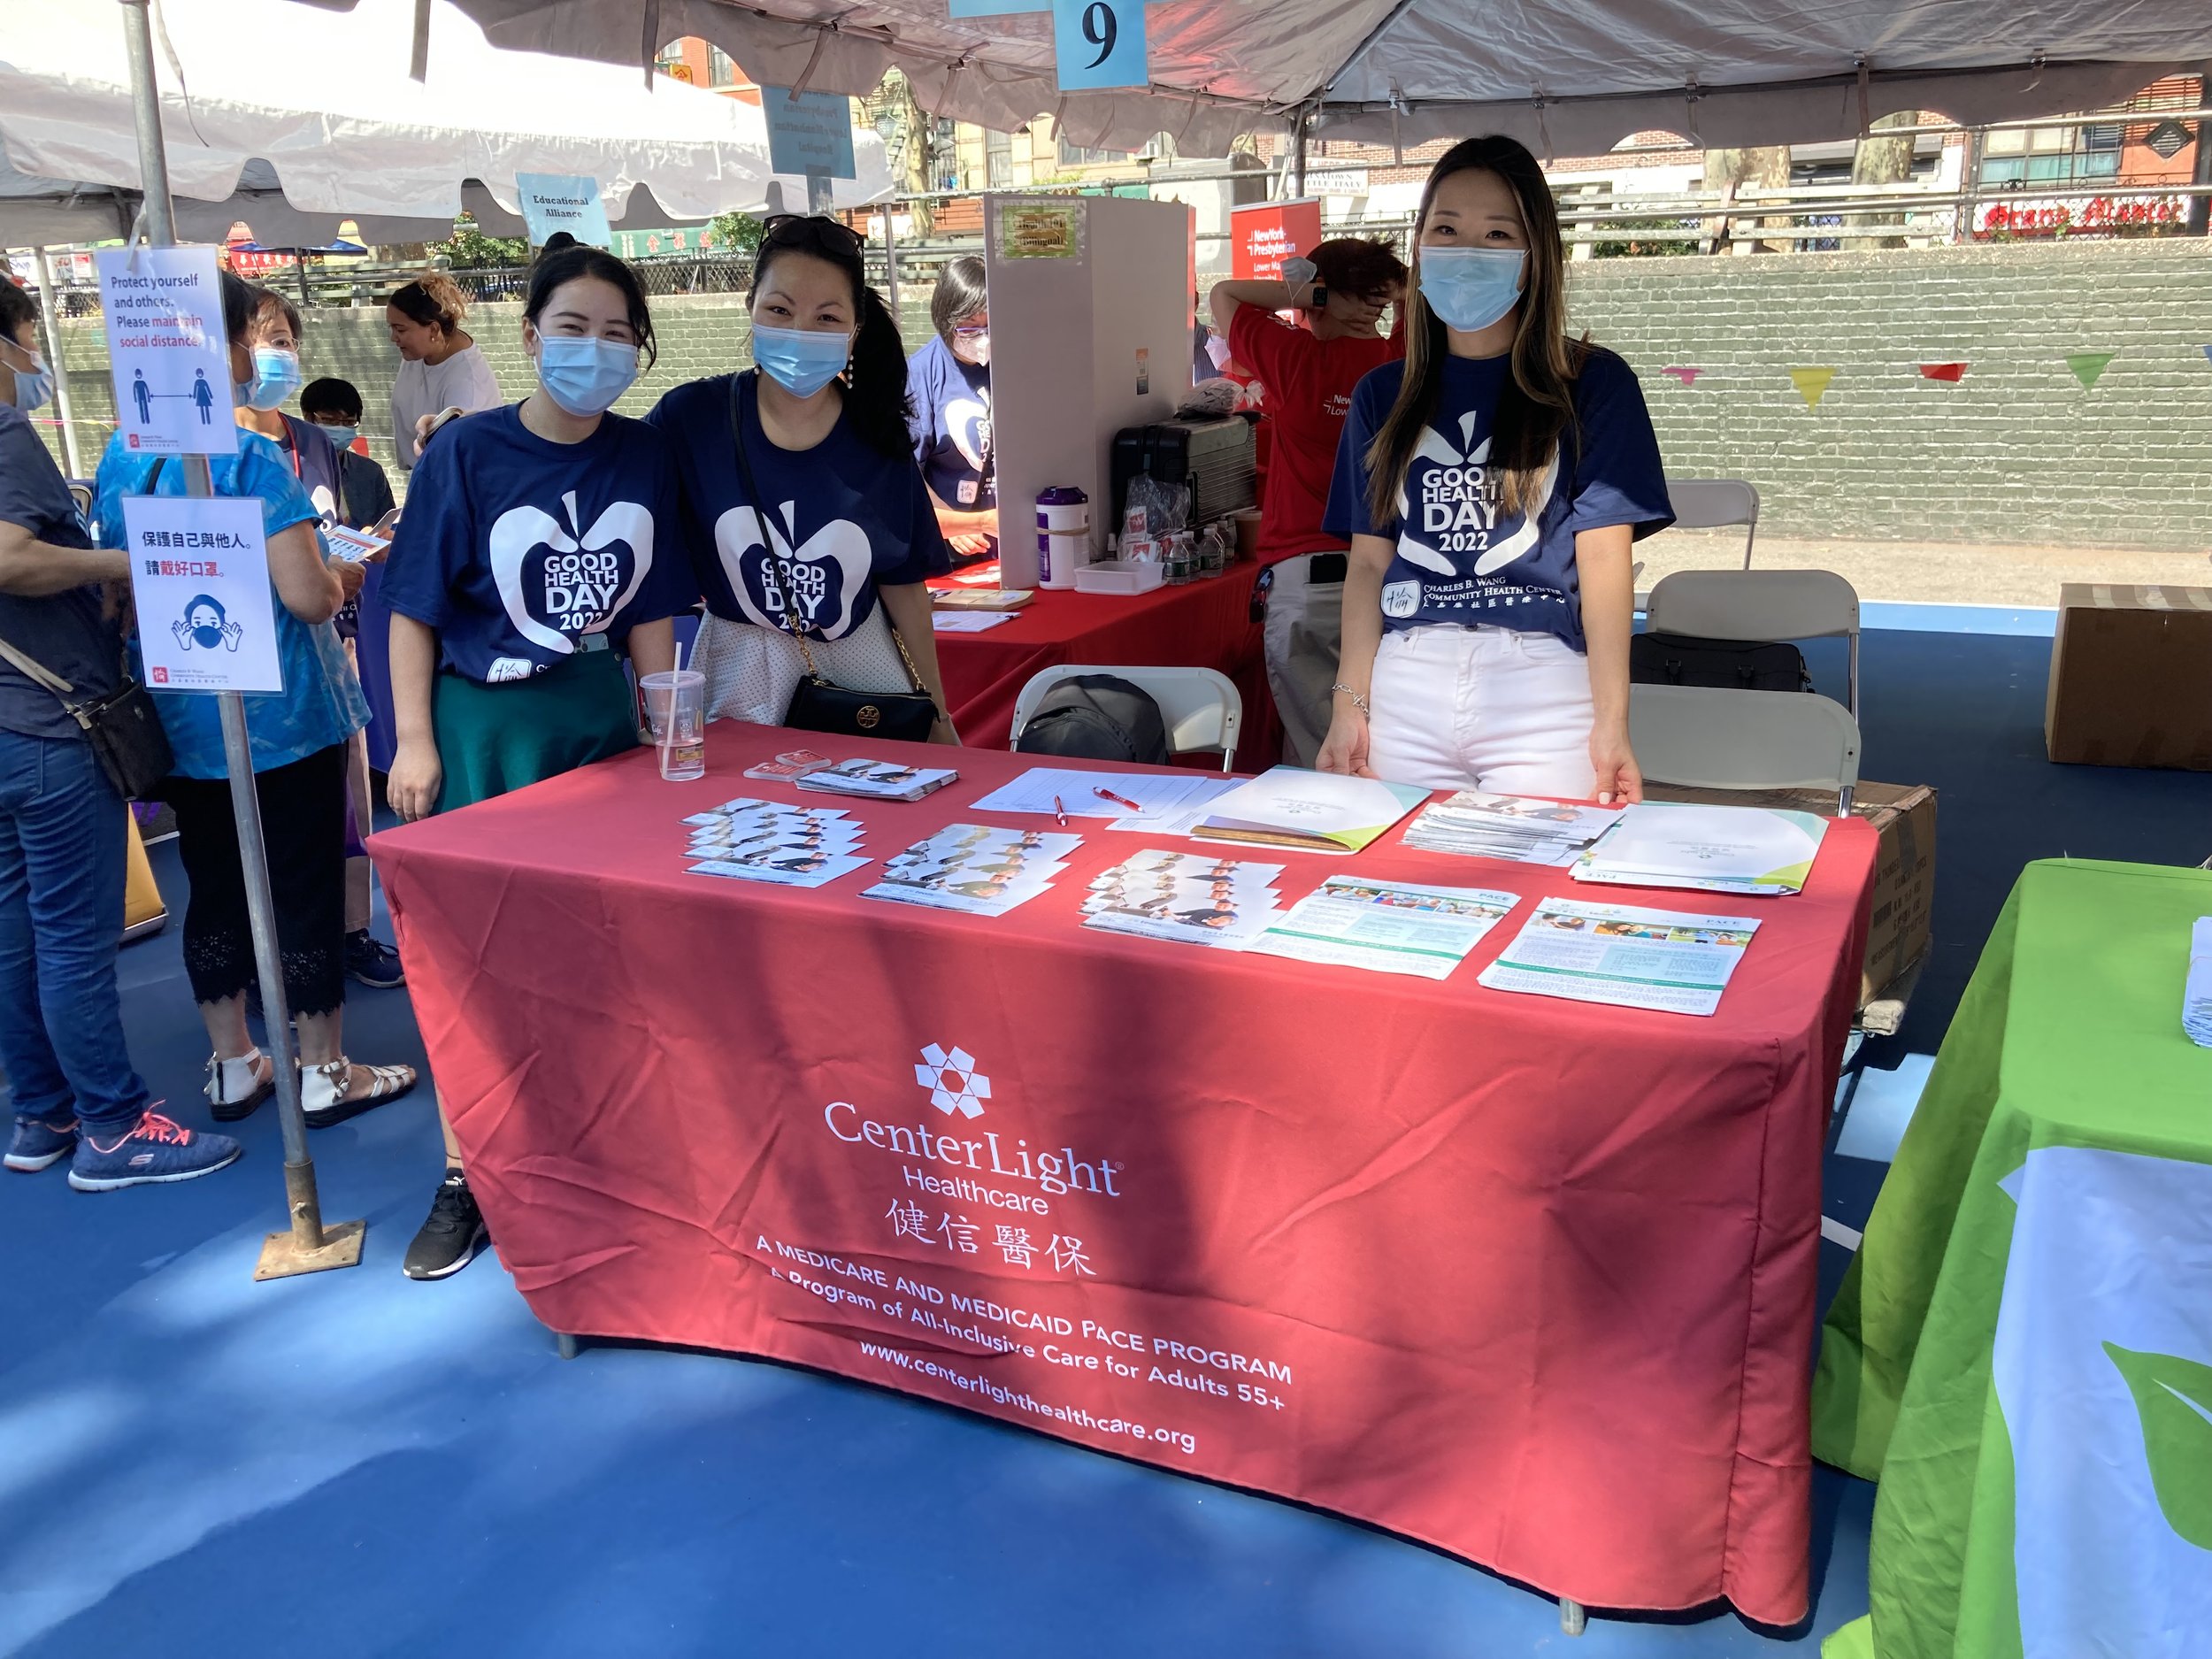  During the Charles B. Wang events, CenterLight Healthcare PACE reinforced our commitment to serving the Asian American population and provided information about the PACE program. 